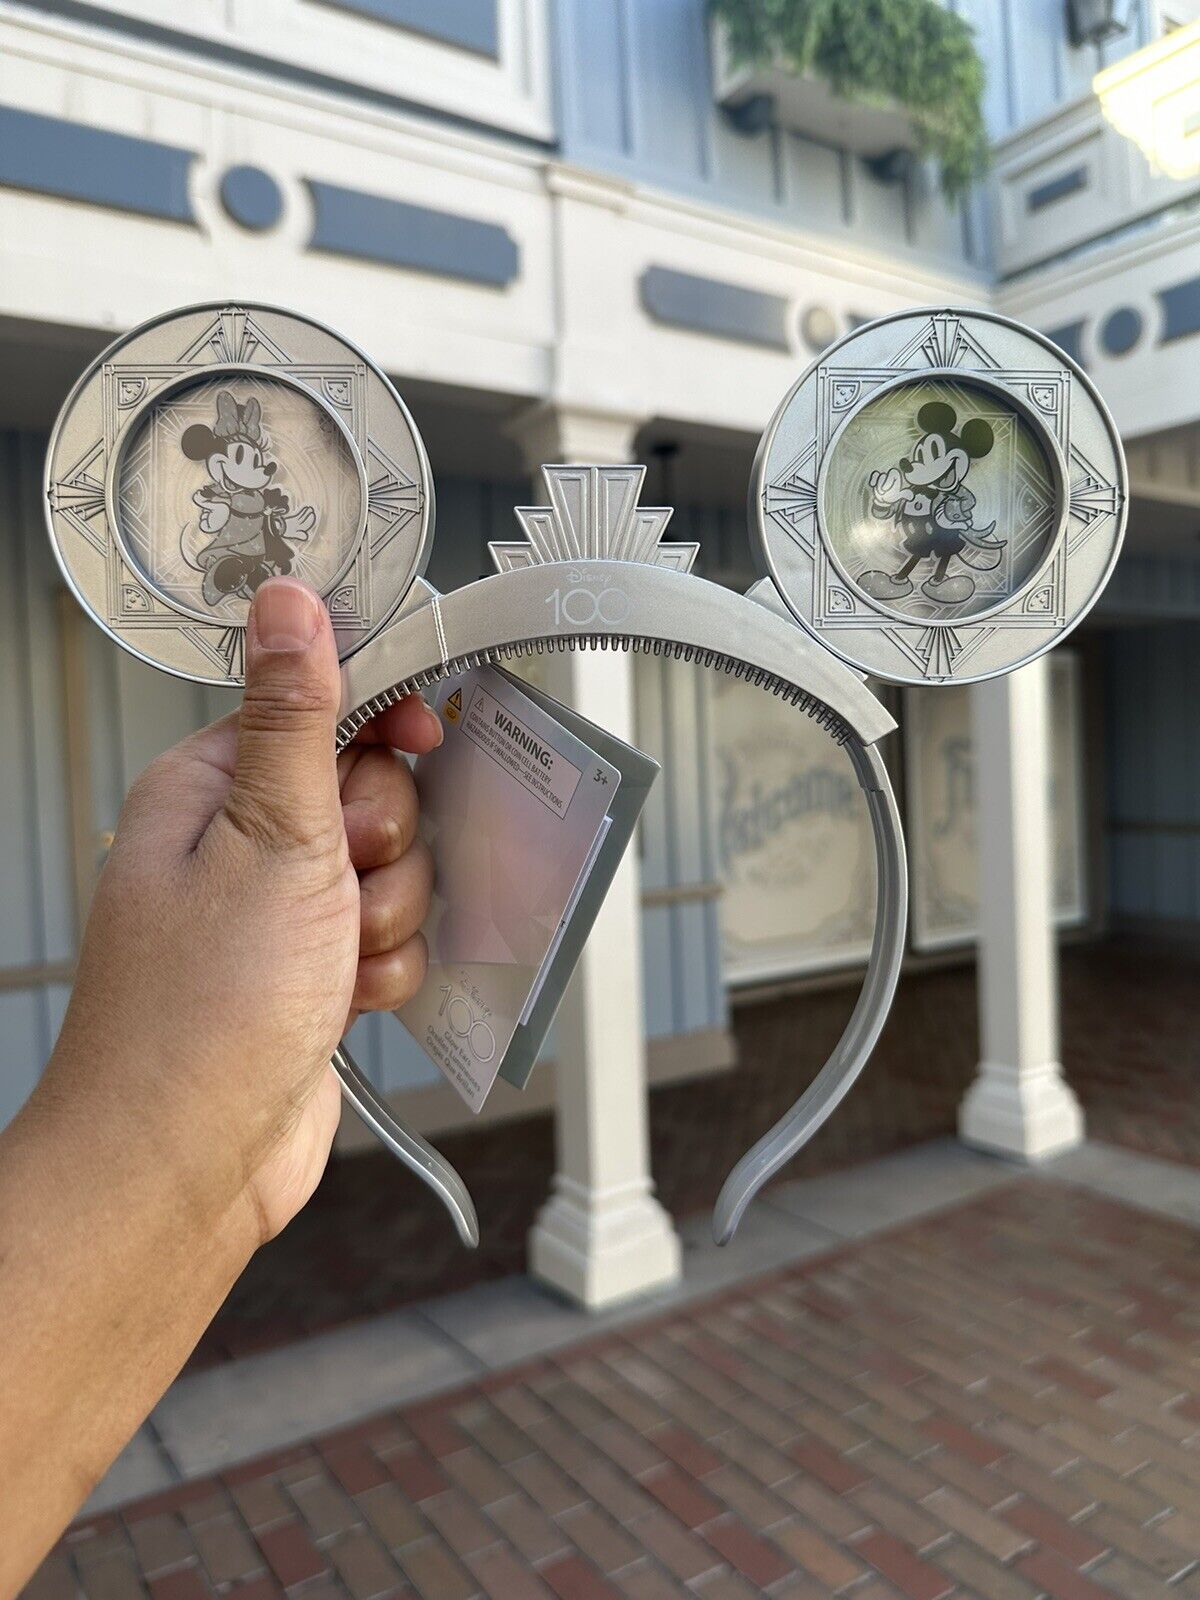 Disneyland NEW 100th Anniversary Light-up Ears Limited Edition Park Exclusive